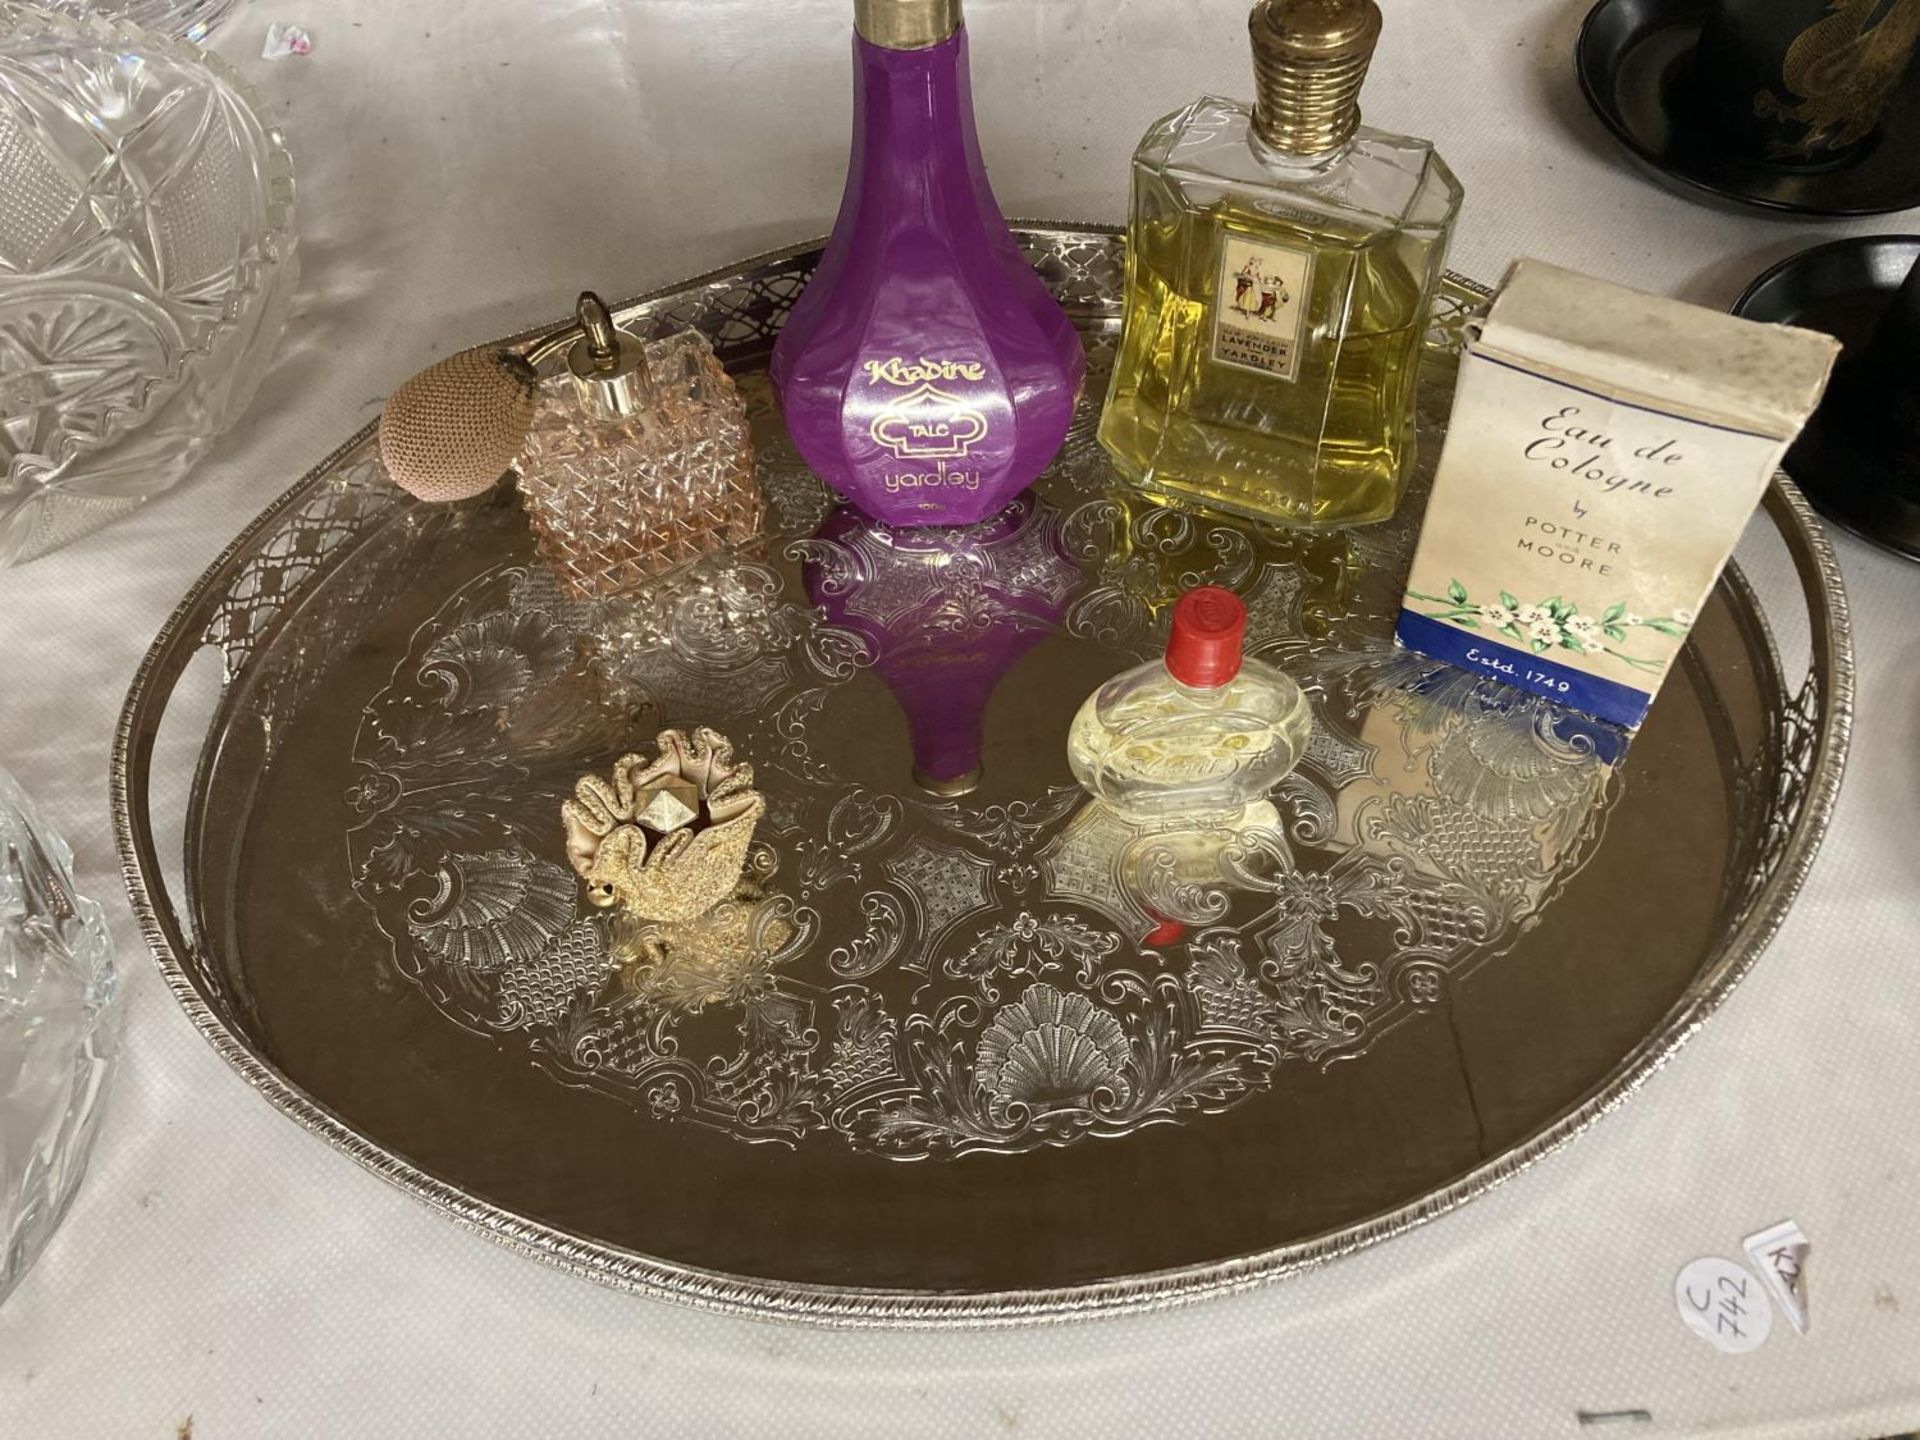 A SILVER PLATED GALLERIED TRAY CONTAINING VINTAGE PERFUMES, TALC AND A SCENT BOTTLE - Image 4 of 4